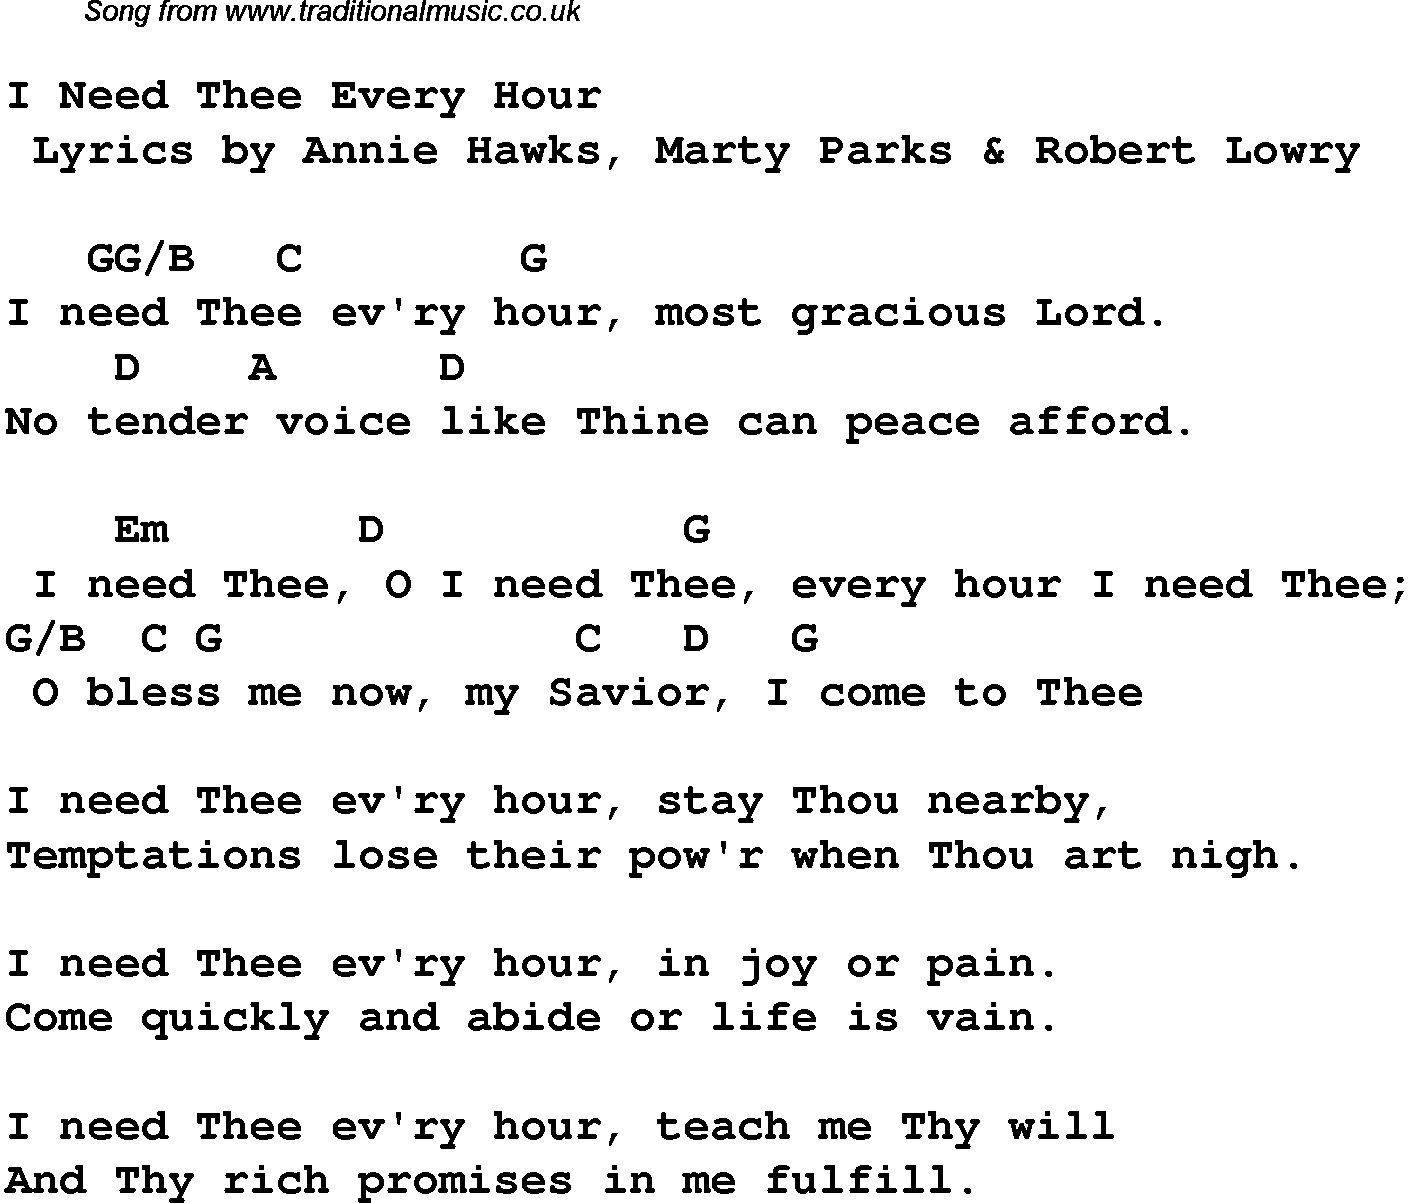 Gospel Song: i-need-thee-every-hour, lyrics and chords.